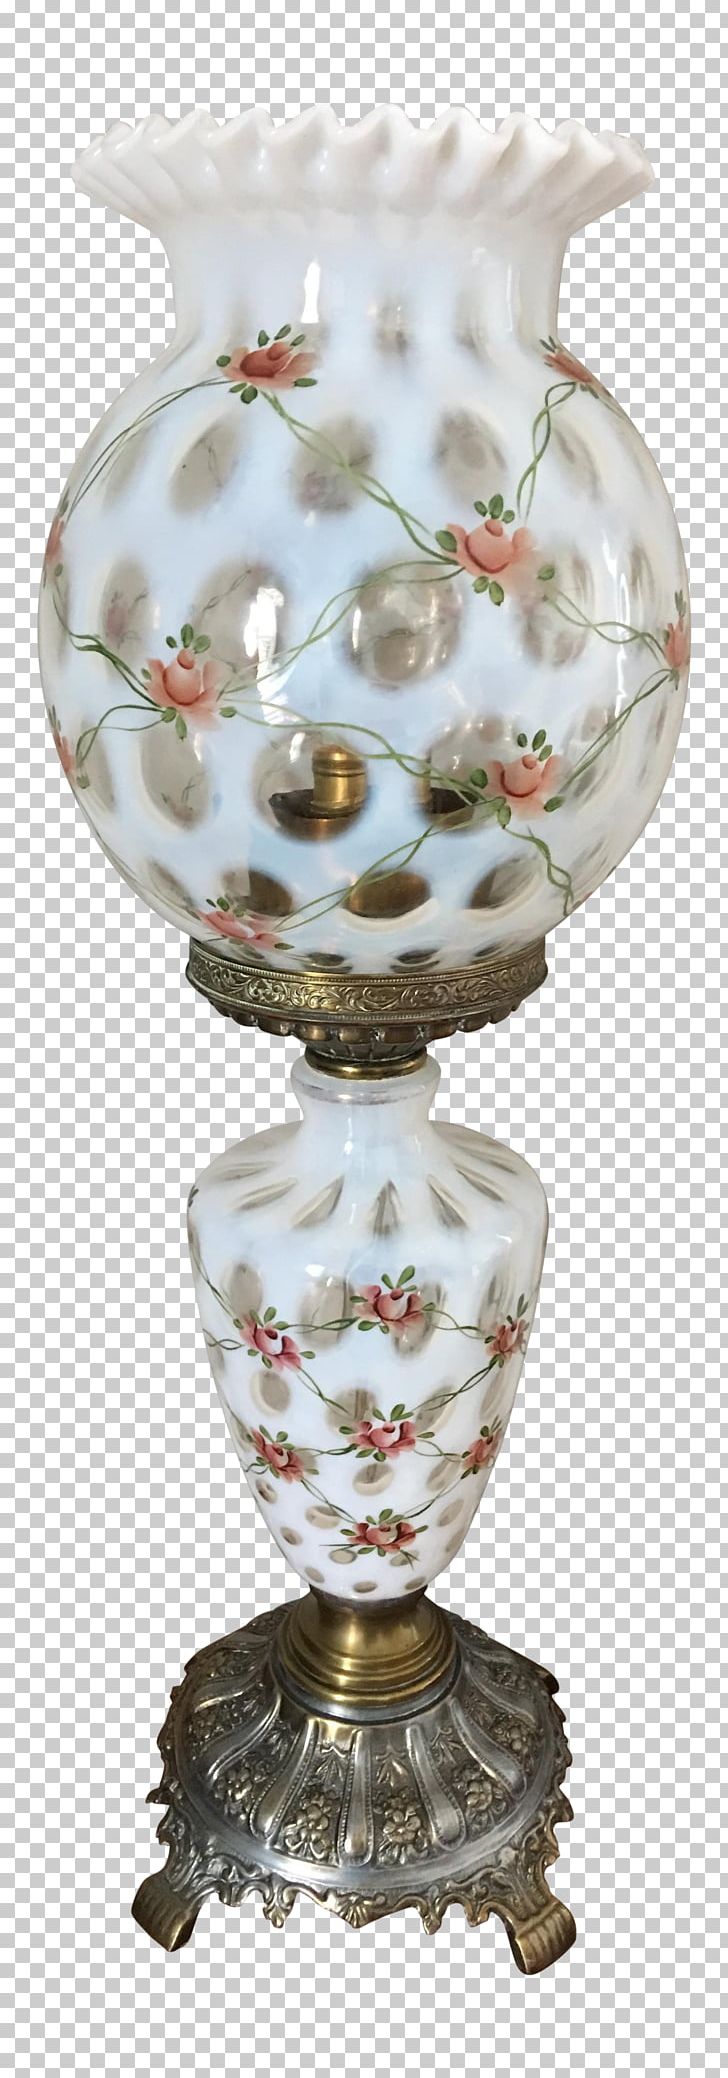 Vase Porcelain Glass Unbreakable PNG, Clipart, Artifact, Flowers, Glass, Hand Painted Rose, Porcelain Free PNG Download